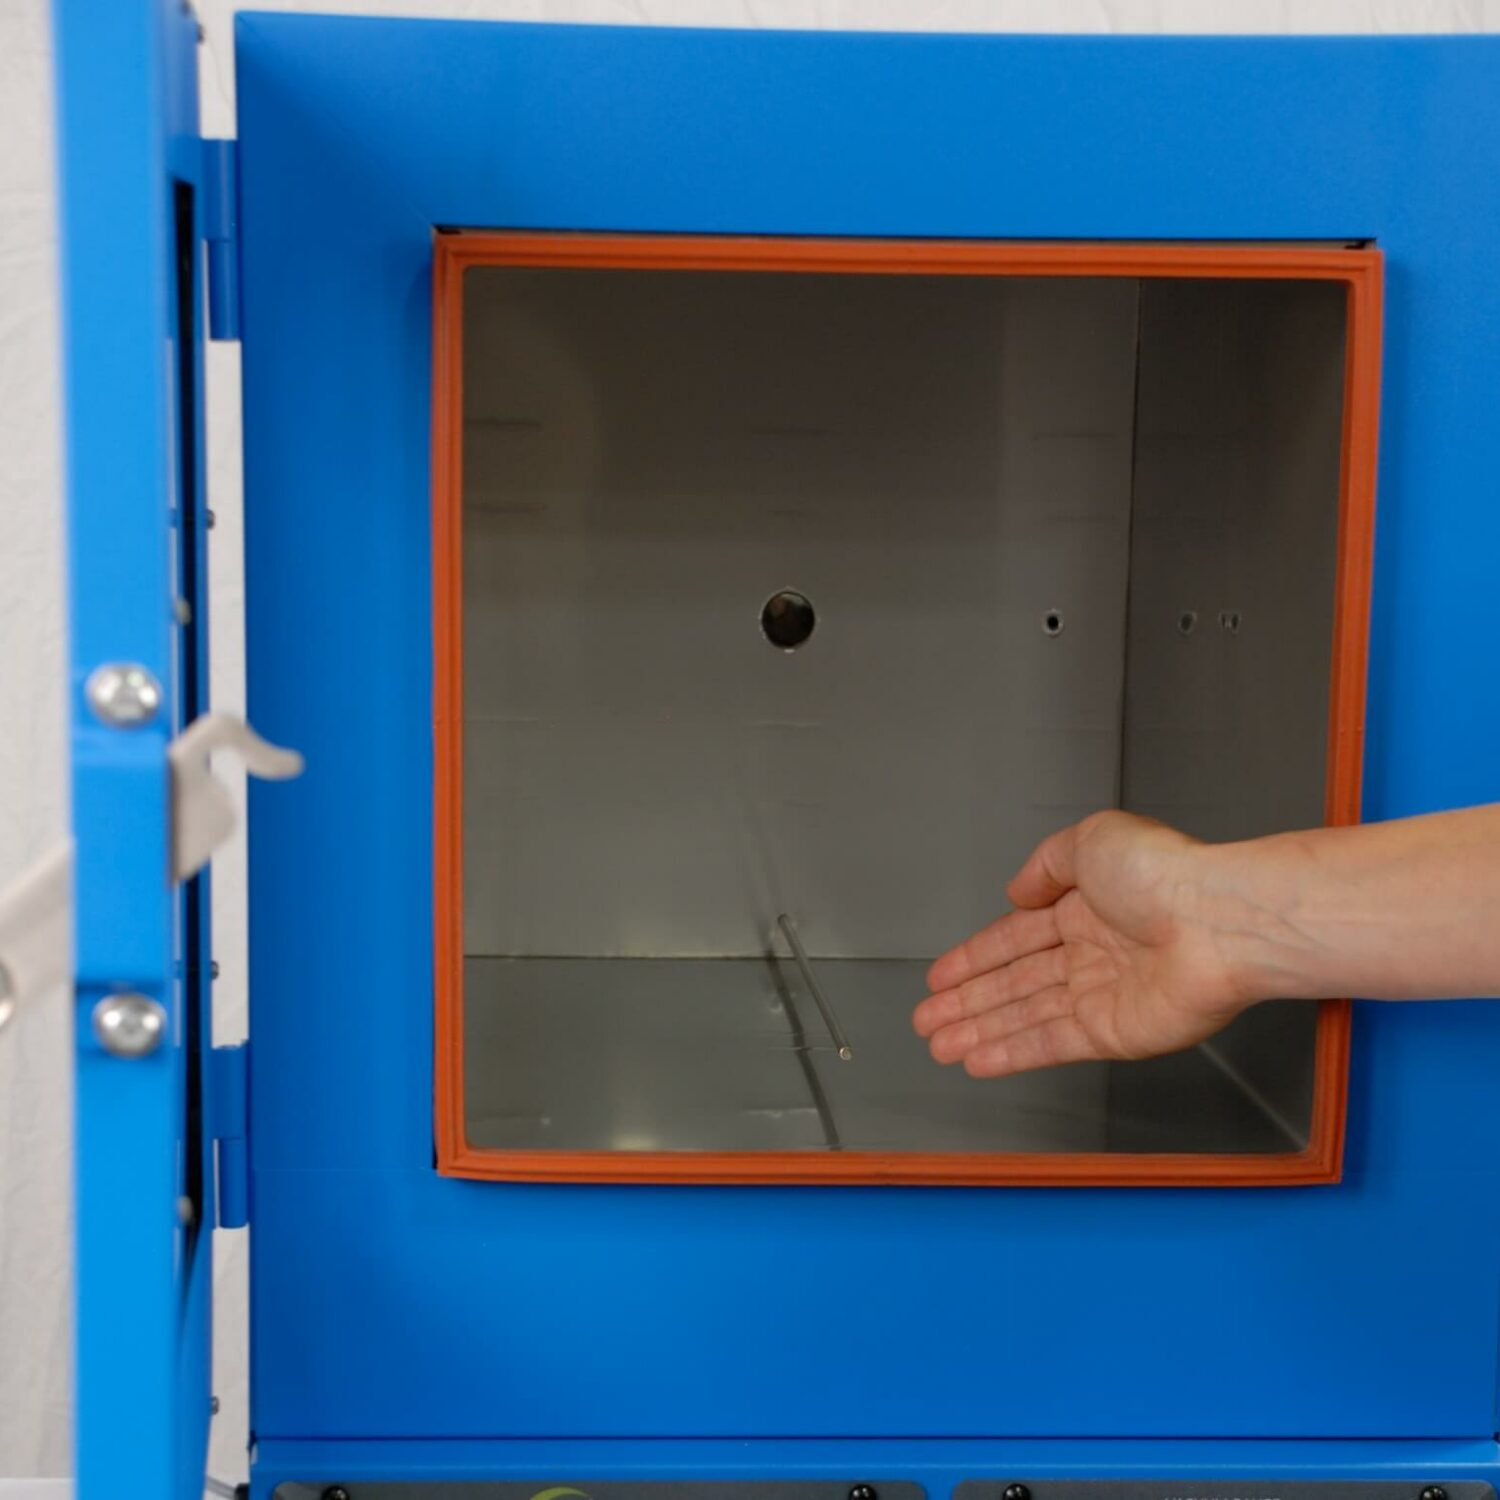 A person aligning a new gasket on an oven door